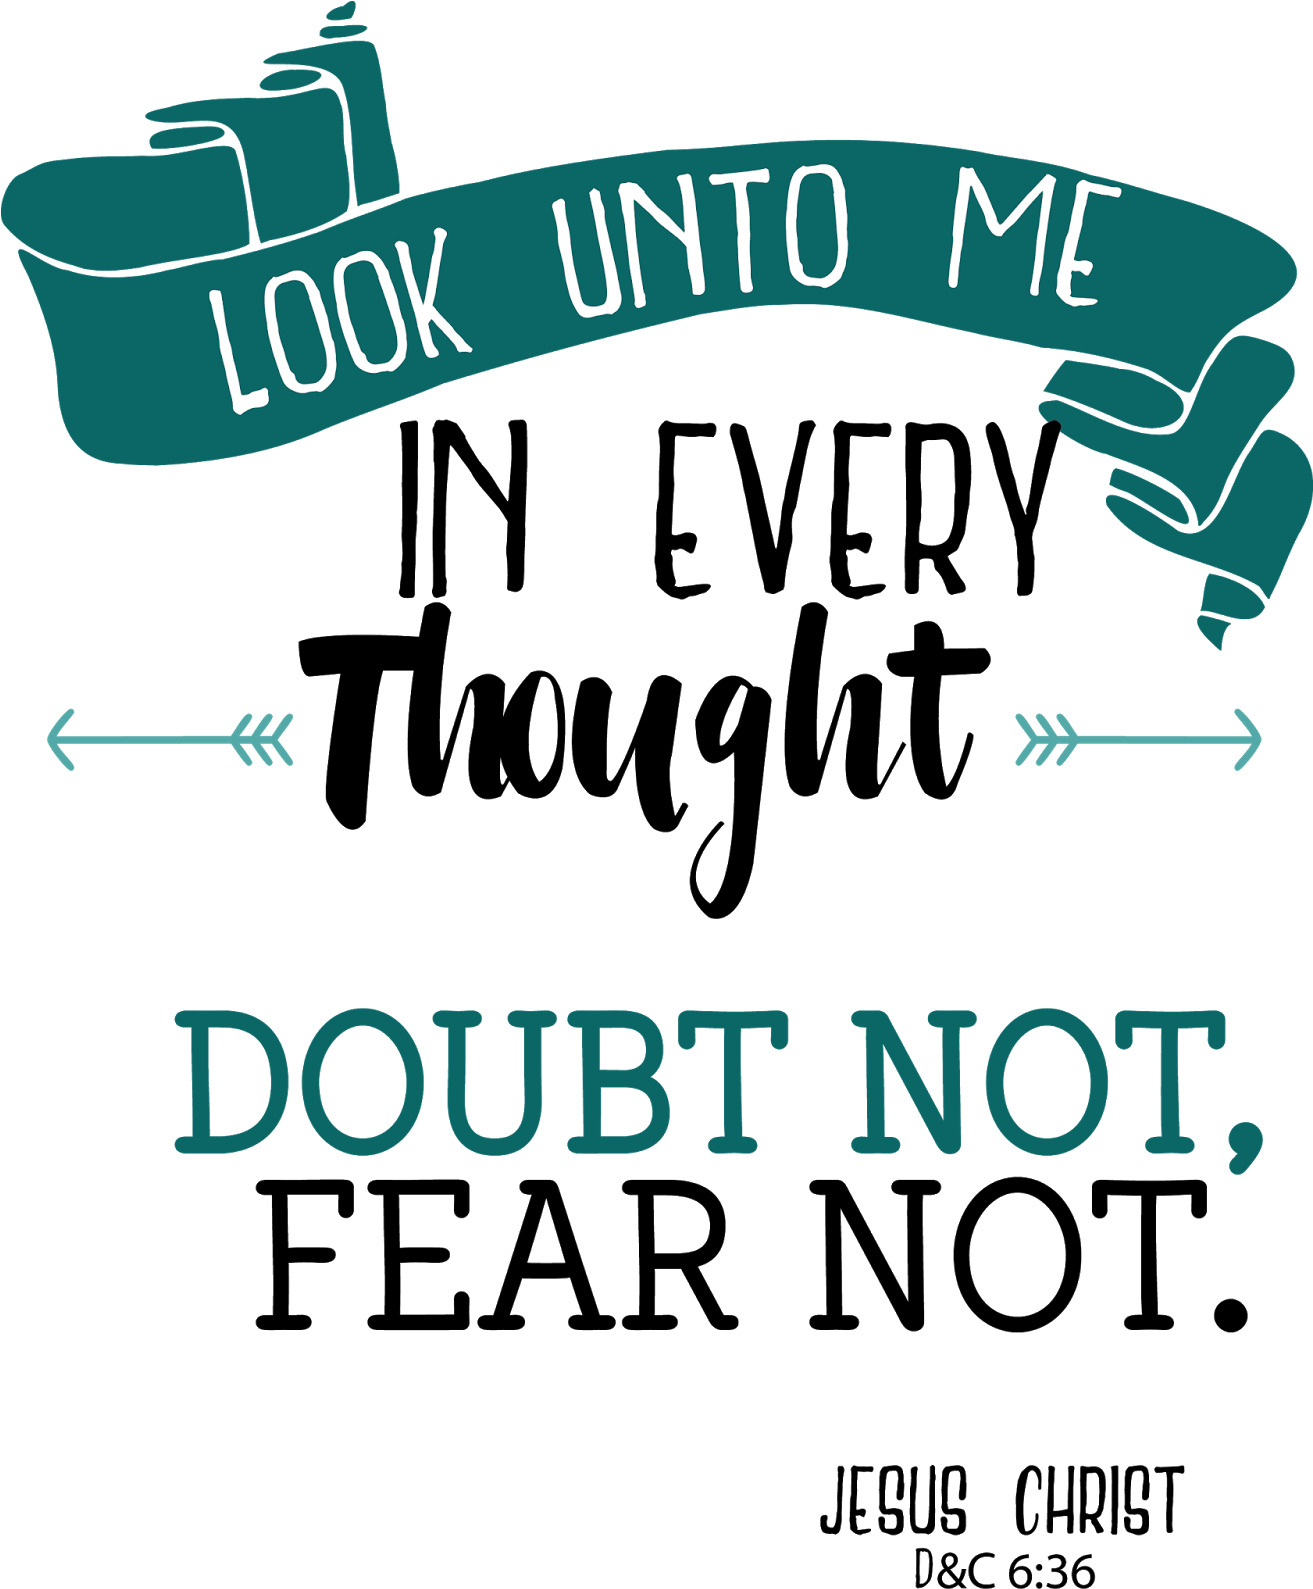 Doubt Not, Fear Not - Look Unto Me In Every Thought Doubt Not Fear Not (1312x1600), Png Download